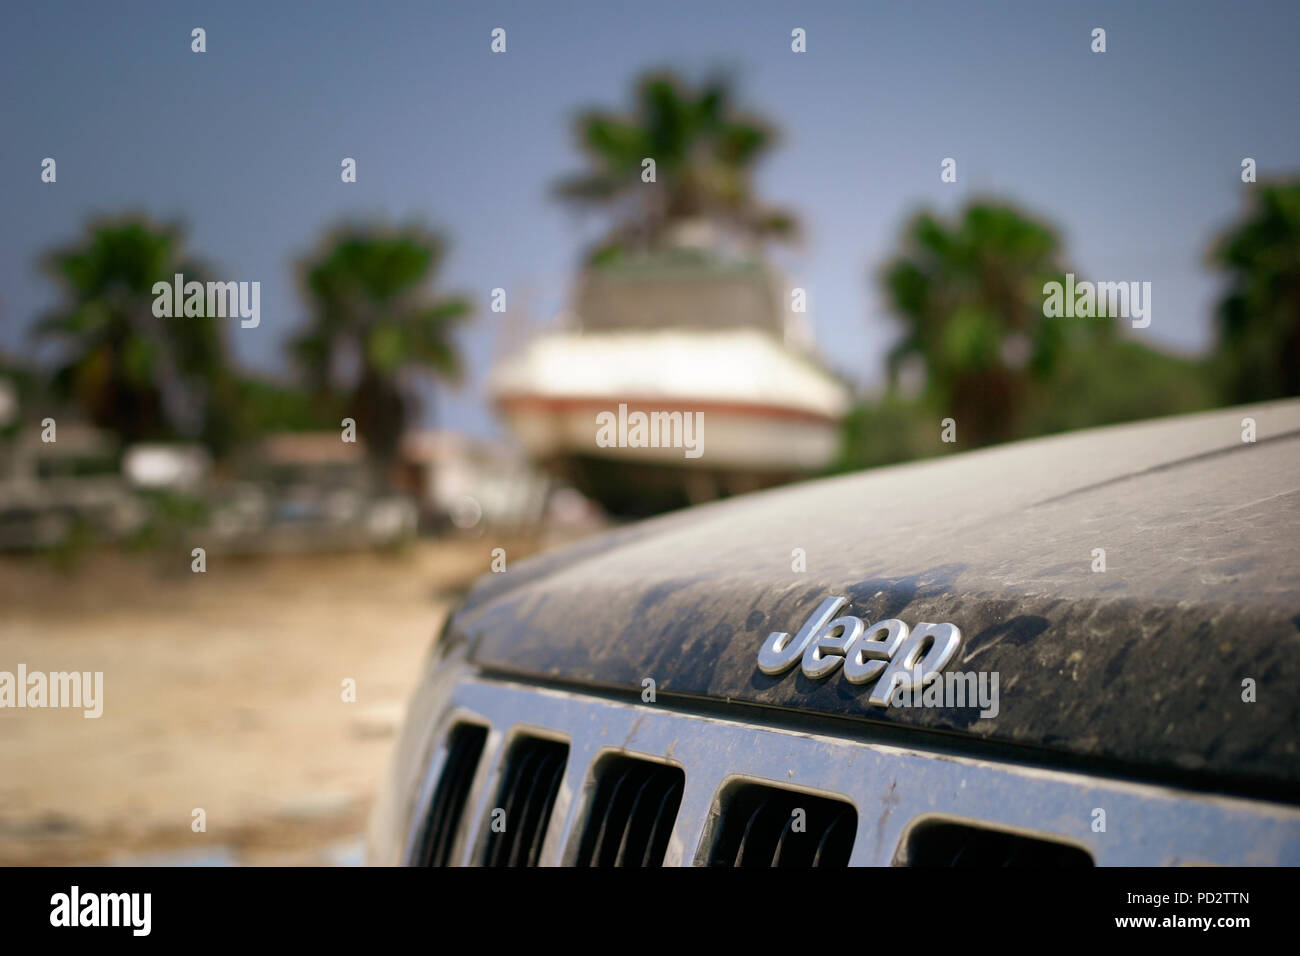 A dusty jeep parked in front of a boat storage yard, close up of jeep branding and the dirt on the bonnet. Boat in the background, with palm trees. Stock Photo